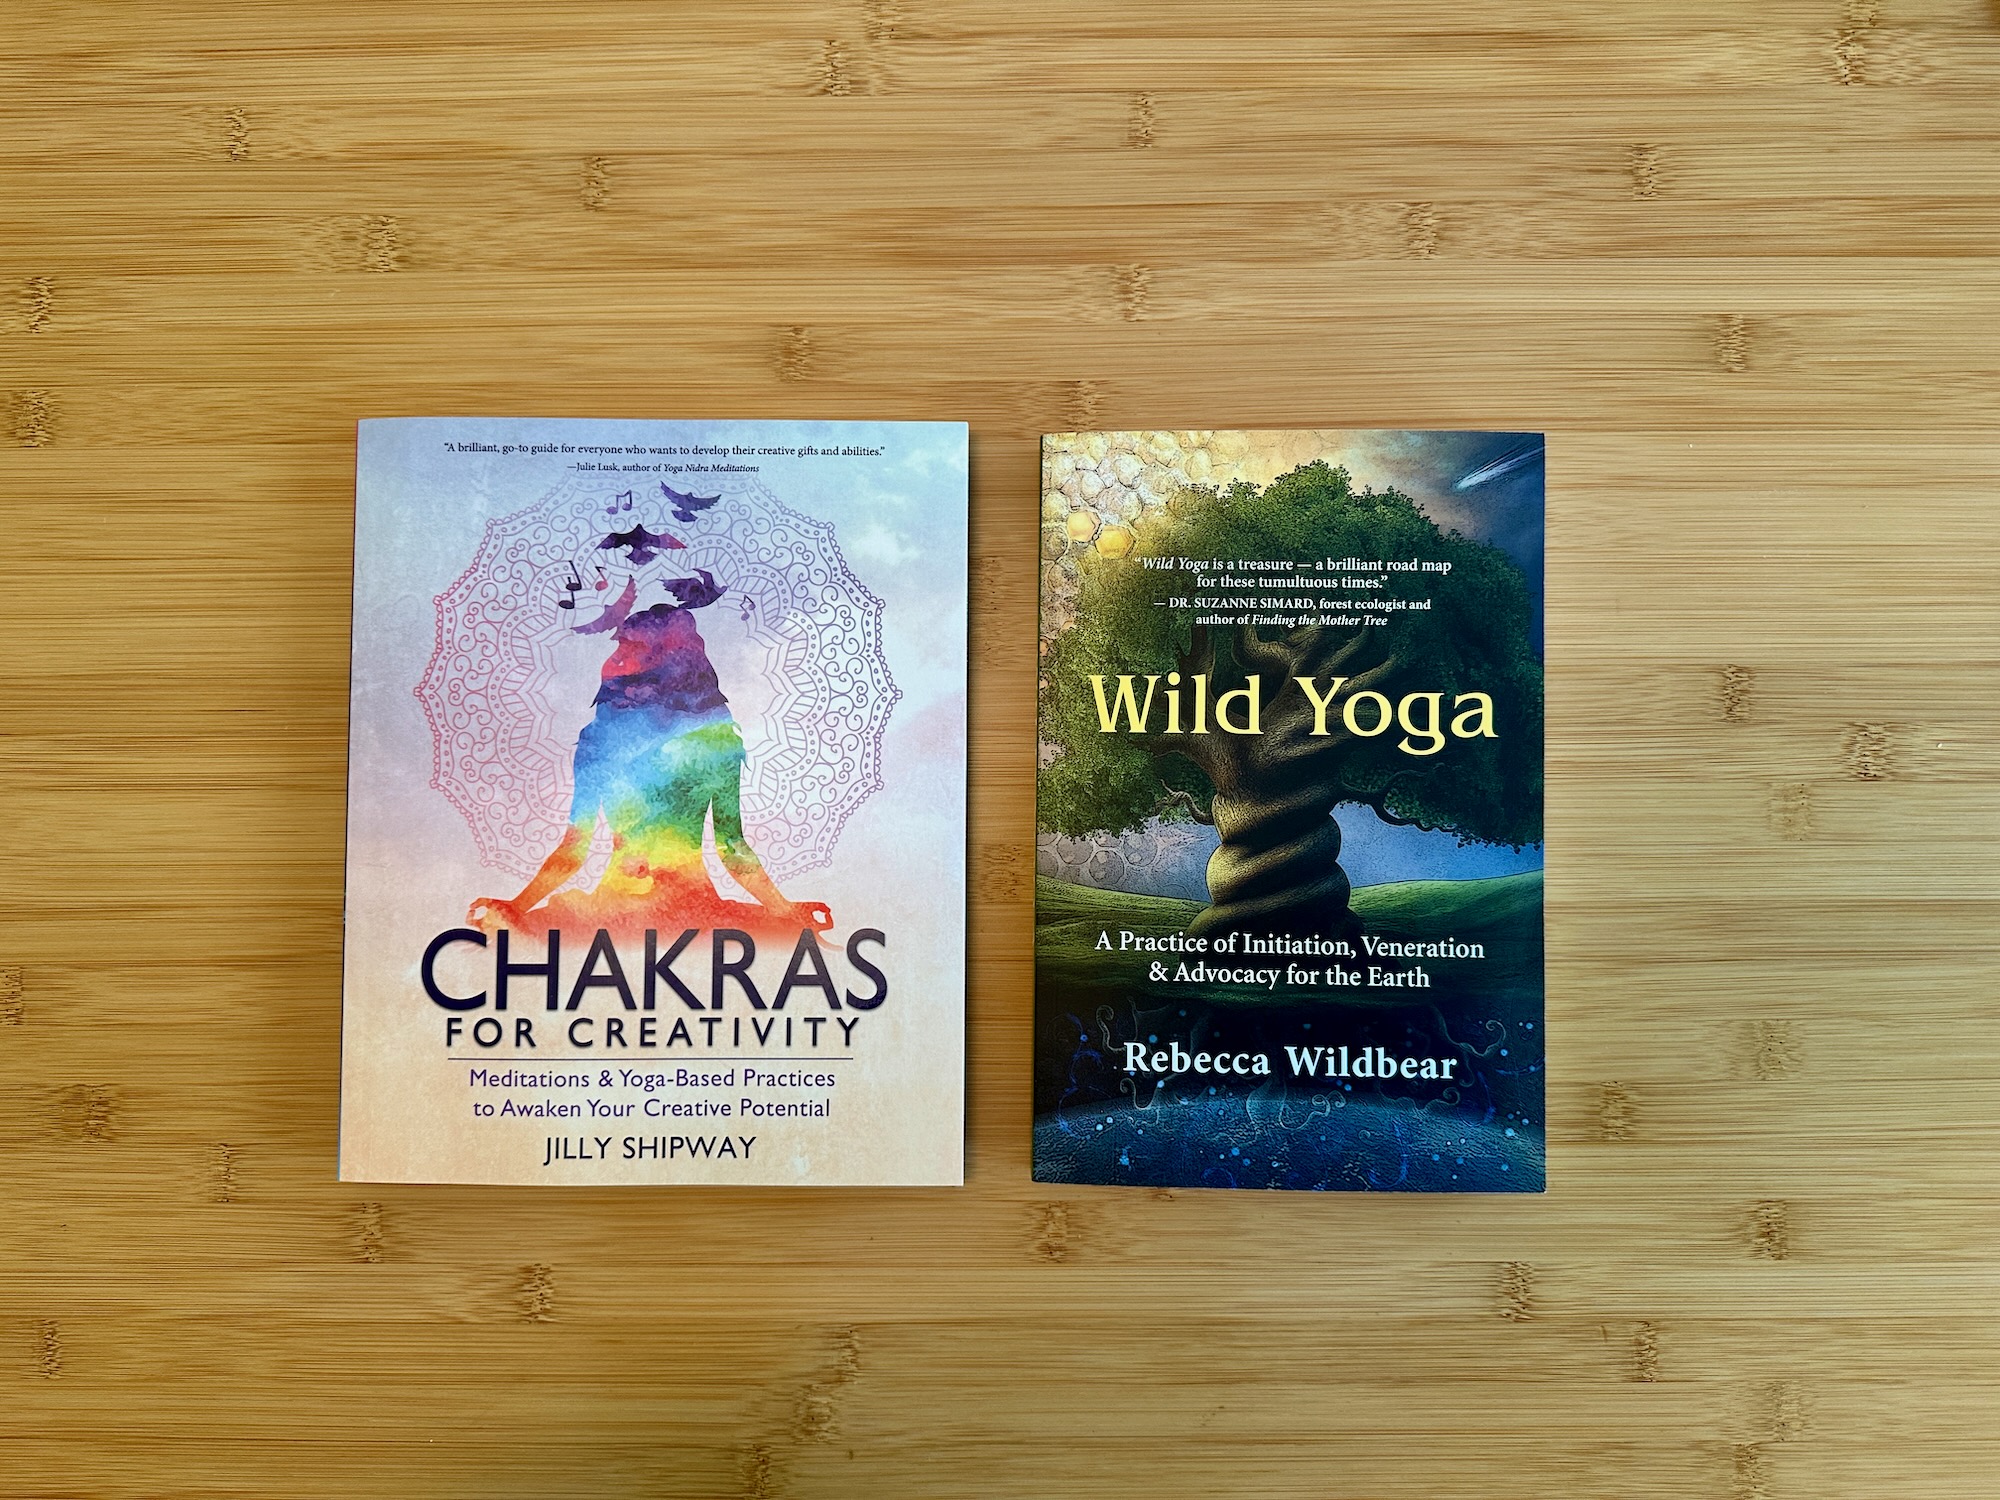 Recommended Books: Chakras for Creativity and Wild Yoga